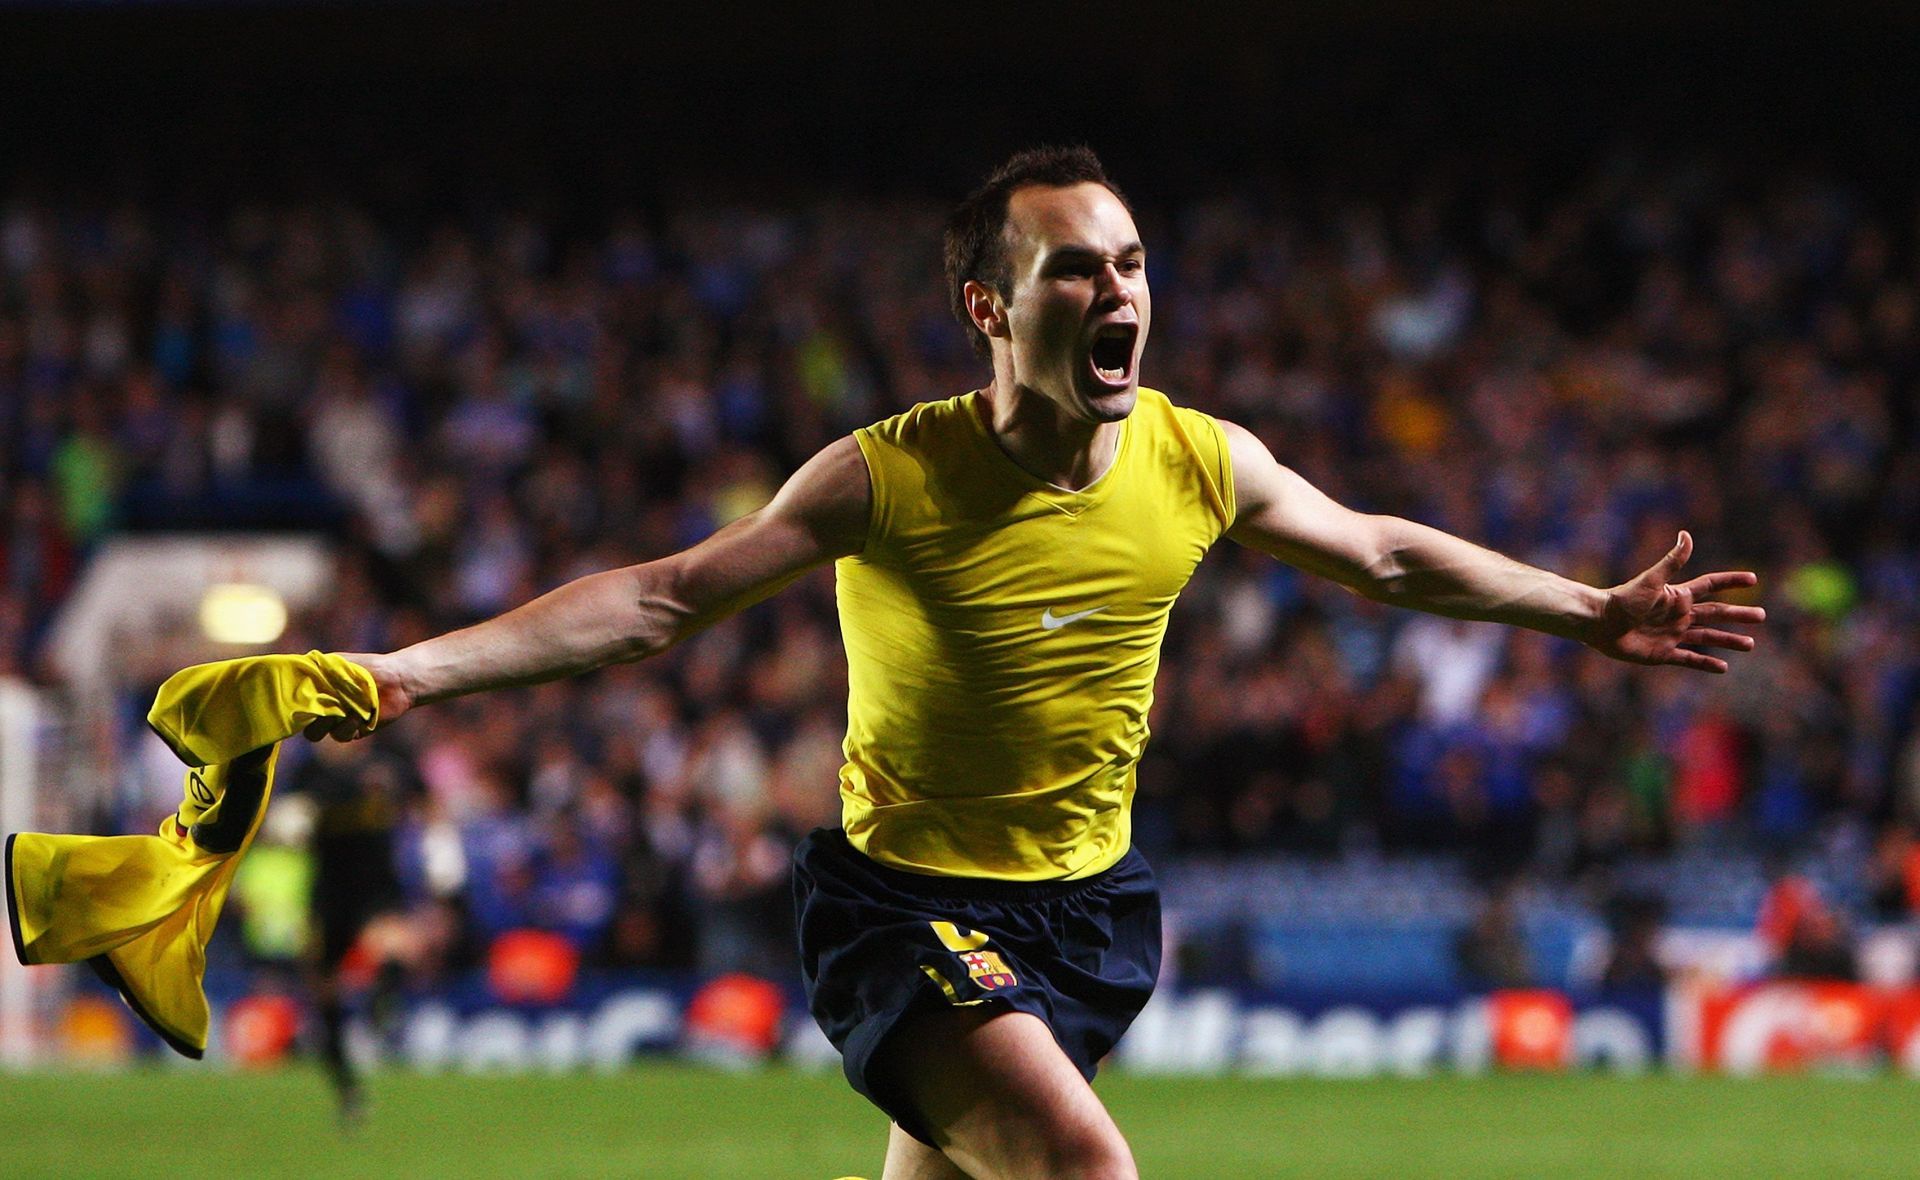 Andres Iniesta scored an iconic long-range effort that decided the tie